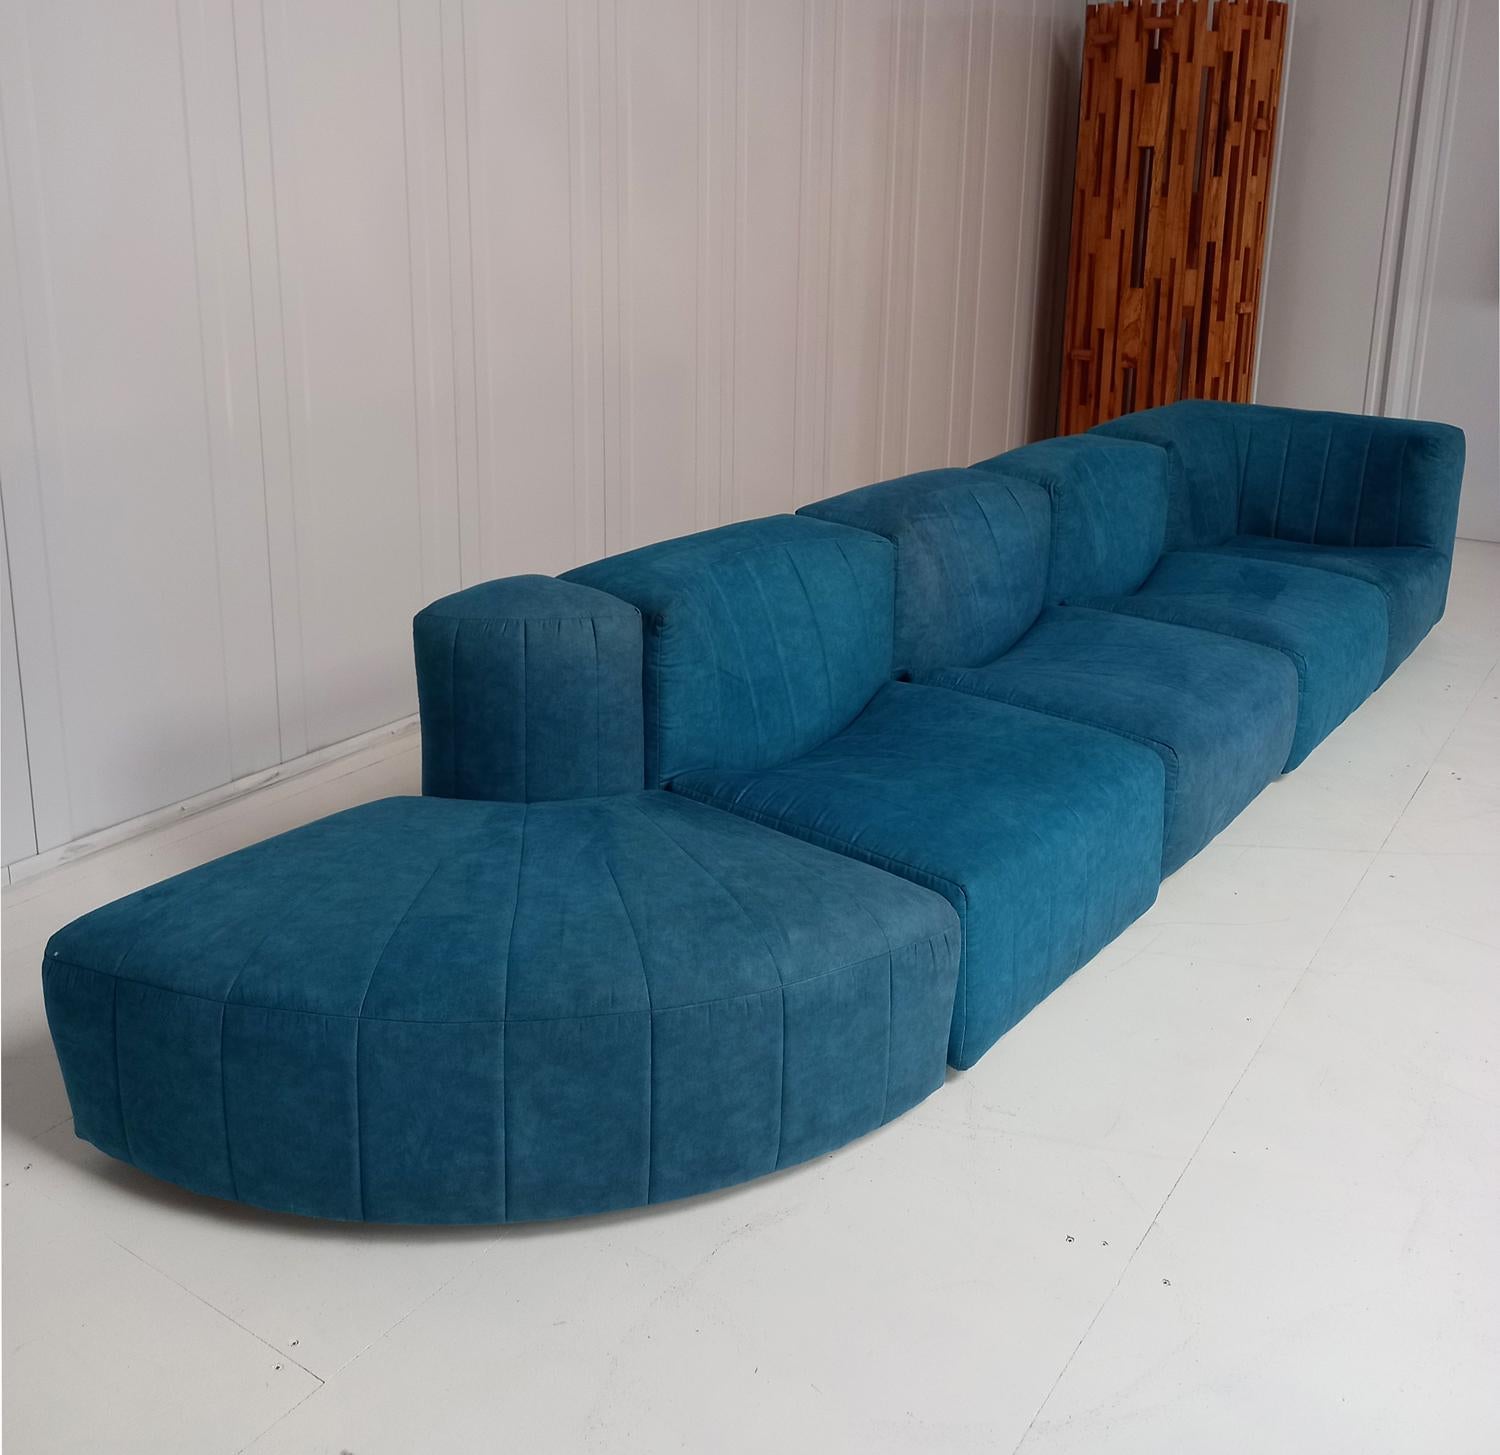 Modular sofa, designed by Tito Agnoli 1969, for Artflex.
A compact, rounded seating system that allows the creation of many configurations. A modern design. Created in the late 60s. 
The set includes five modular pieces which may be combined in